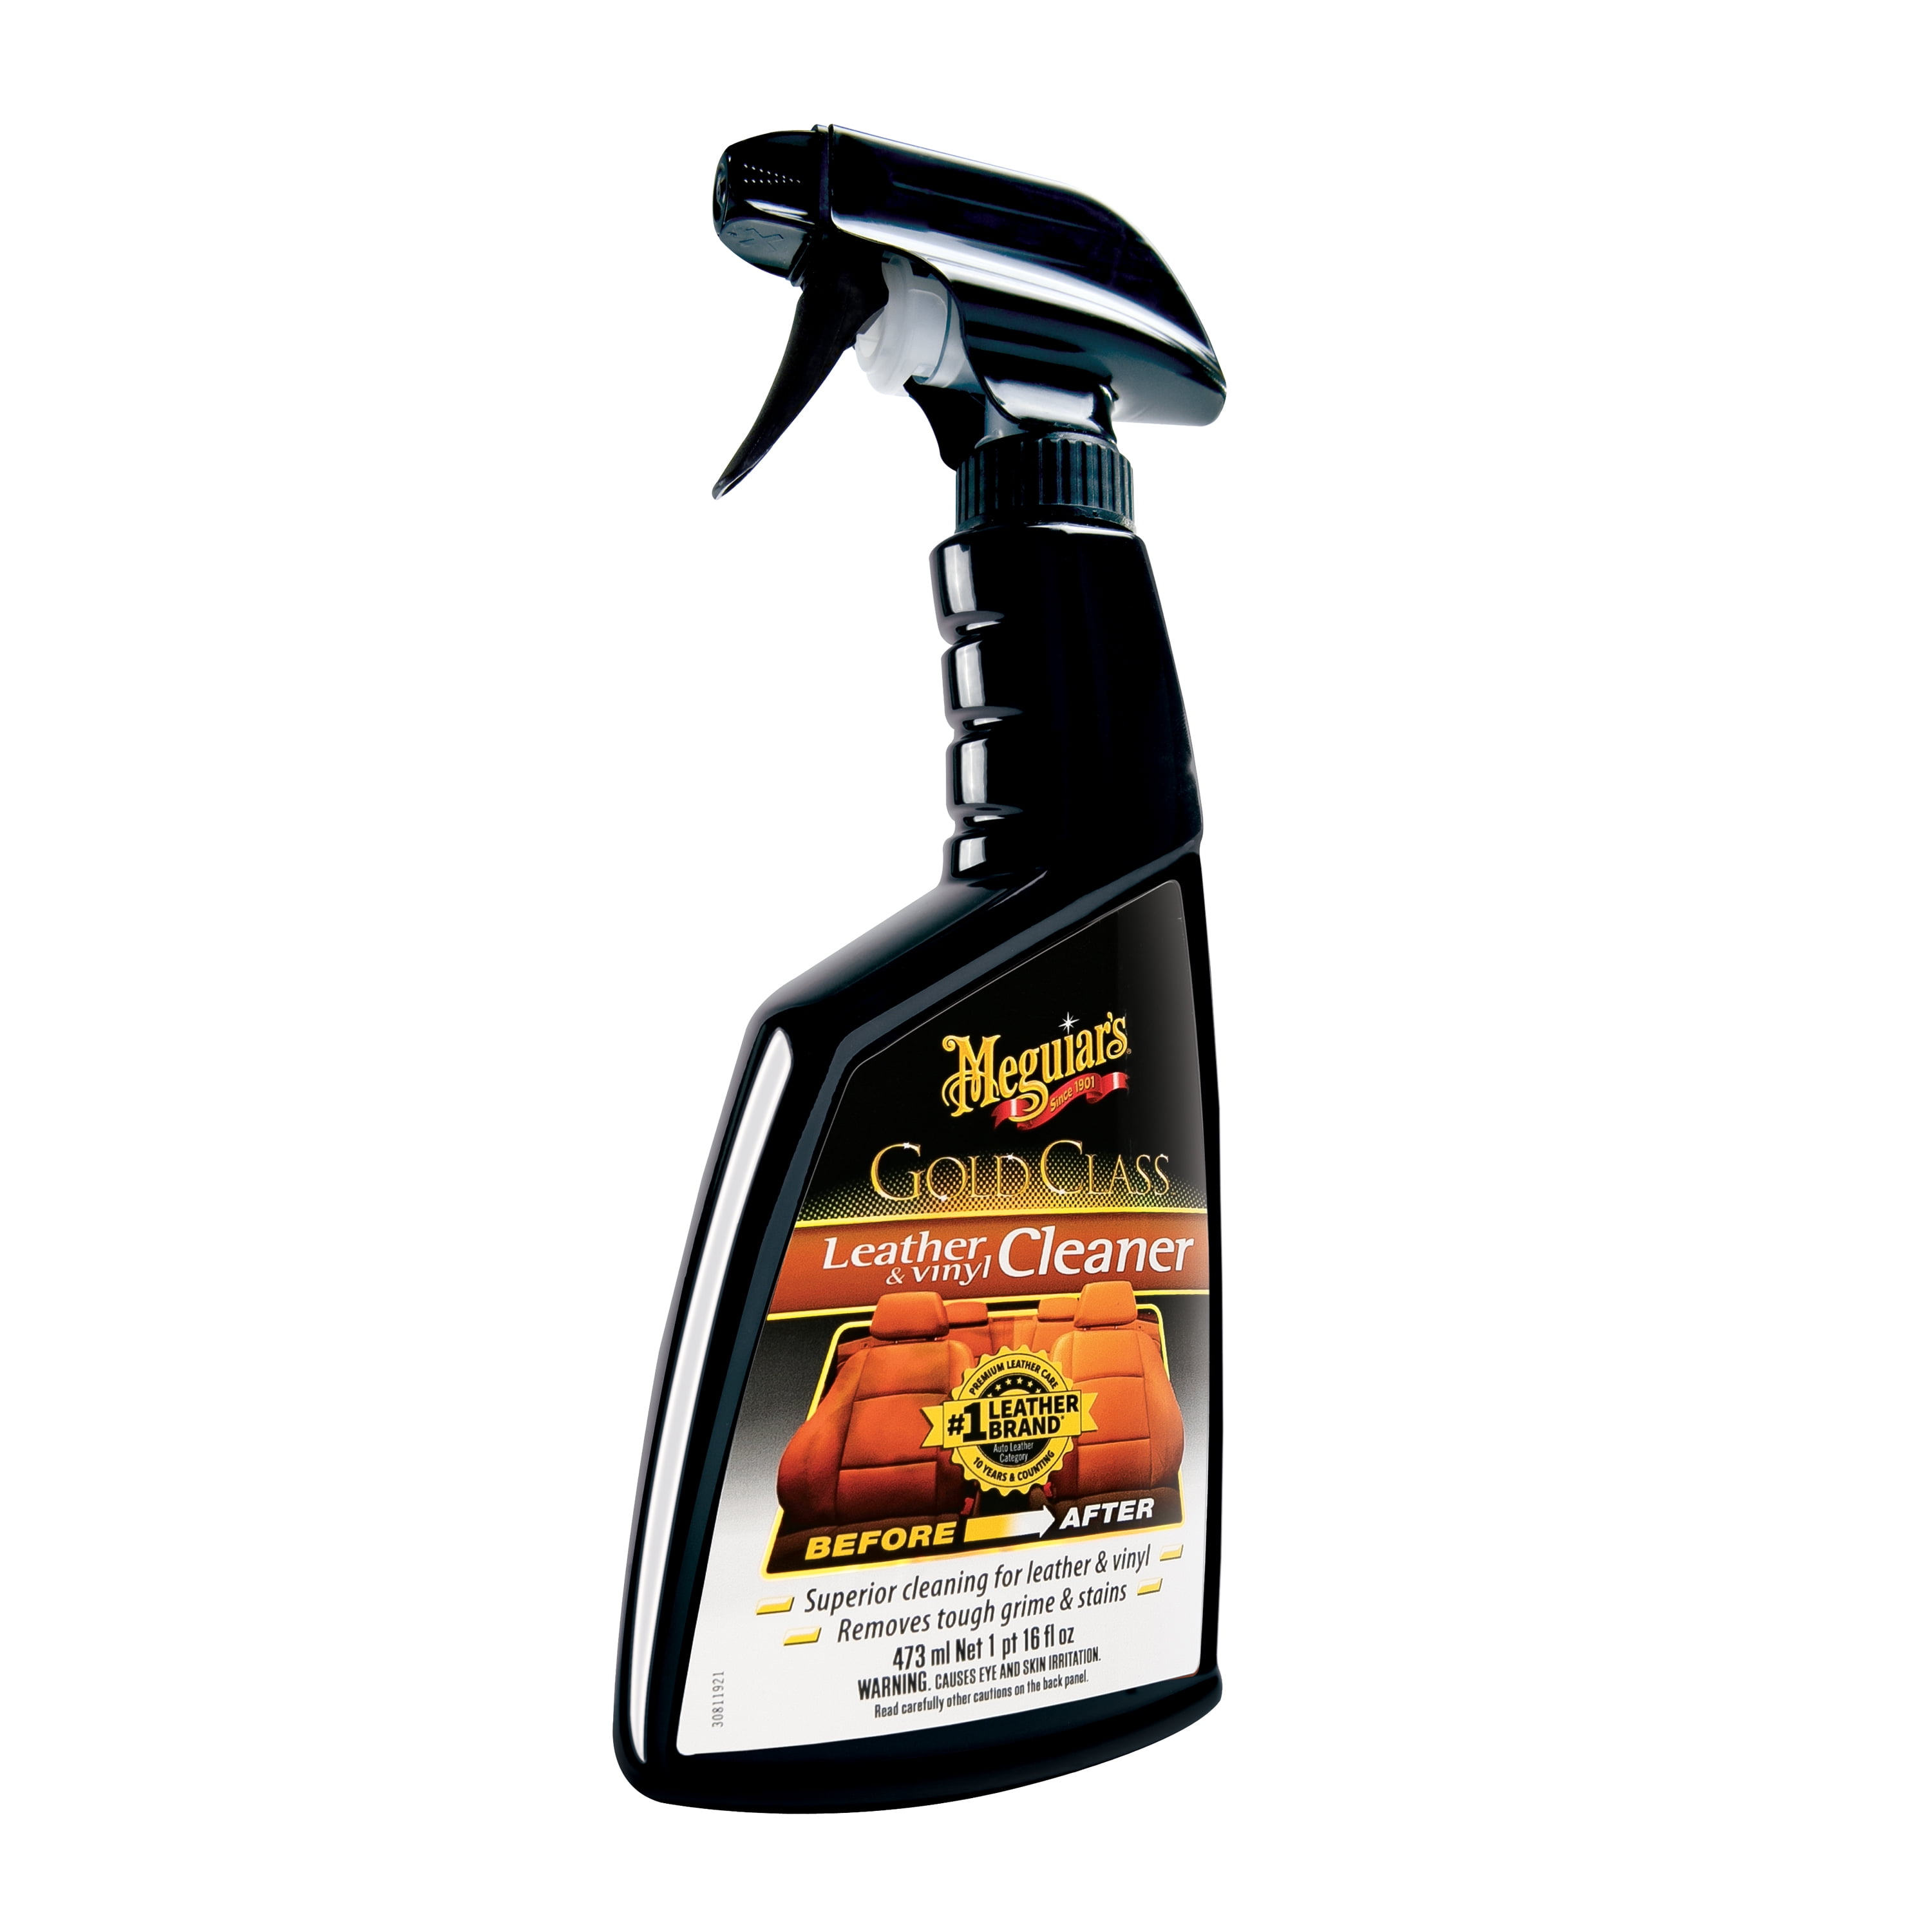 Meguiar's - Make some noise if you've got our Gold Class